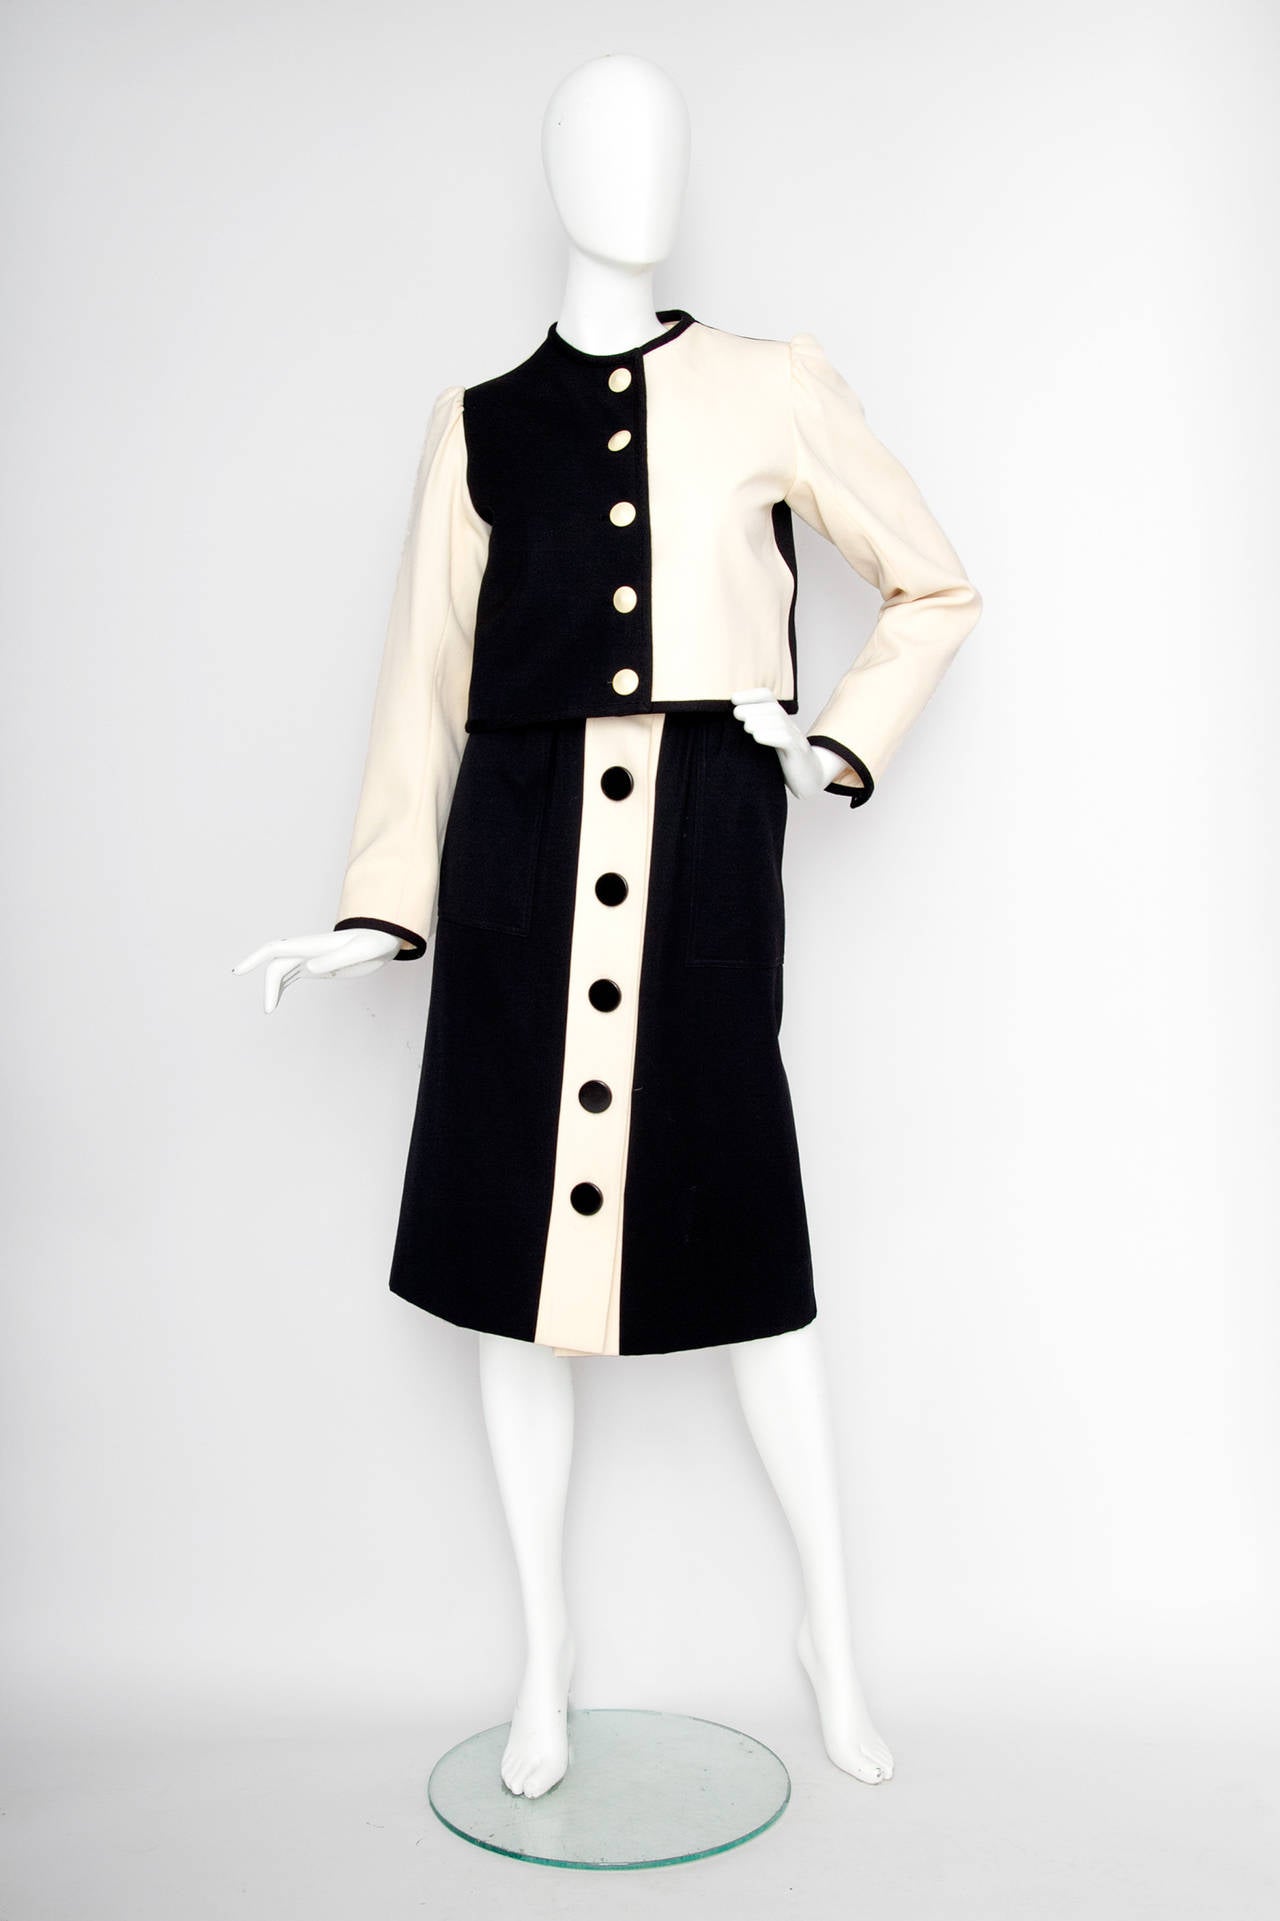 A 1980s black & off-white monochrome Yves Saint Laurent wool skirt suit consisting of a cropped boxy jacket and a high waisted pencil skirt. 

The jacket features long sleeves, a round neckline, shoulder-pads, one buttoned cuffs and a front button